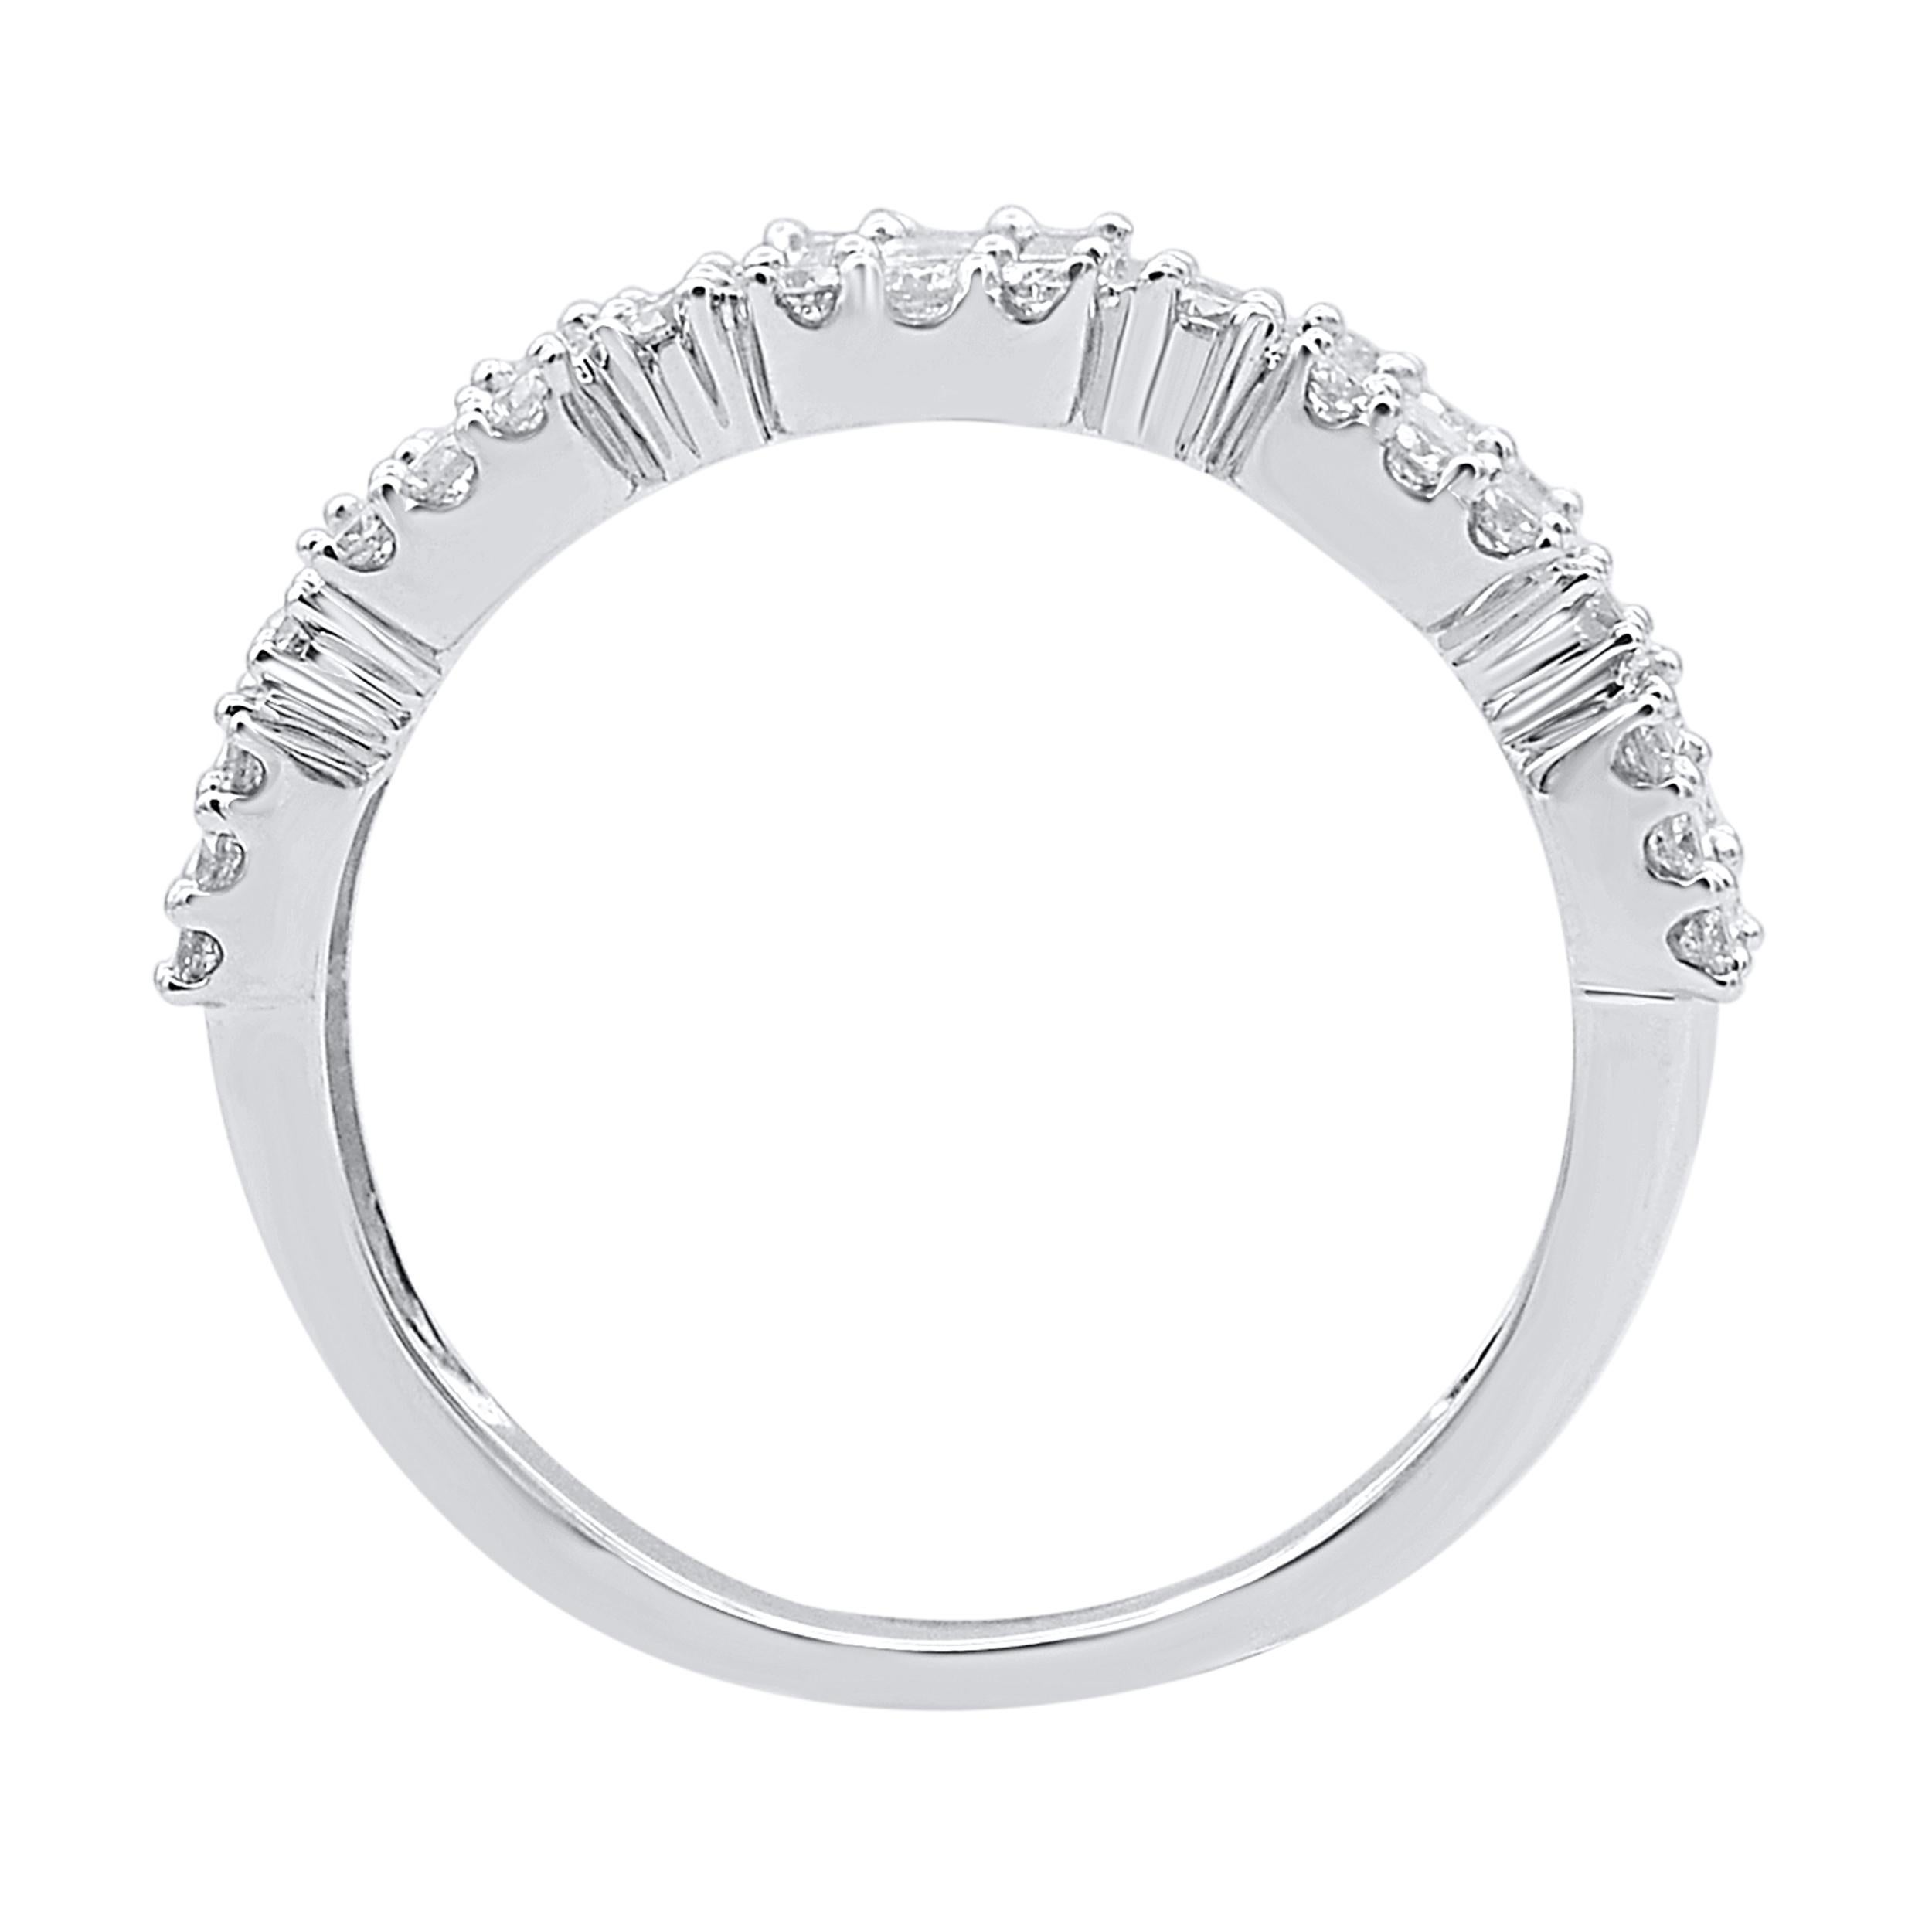 Give a touch of glamour to your fine jewelry collection with this engagement band ring. These beautiful ring is crafted in 14KT white gold, and studded with 53 brilliant  cut and baguette cut natural diamonds in prong setting. The total diamond